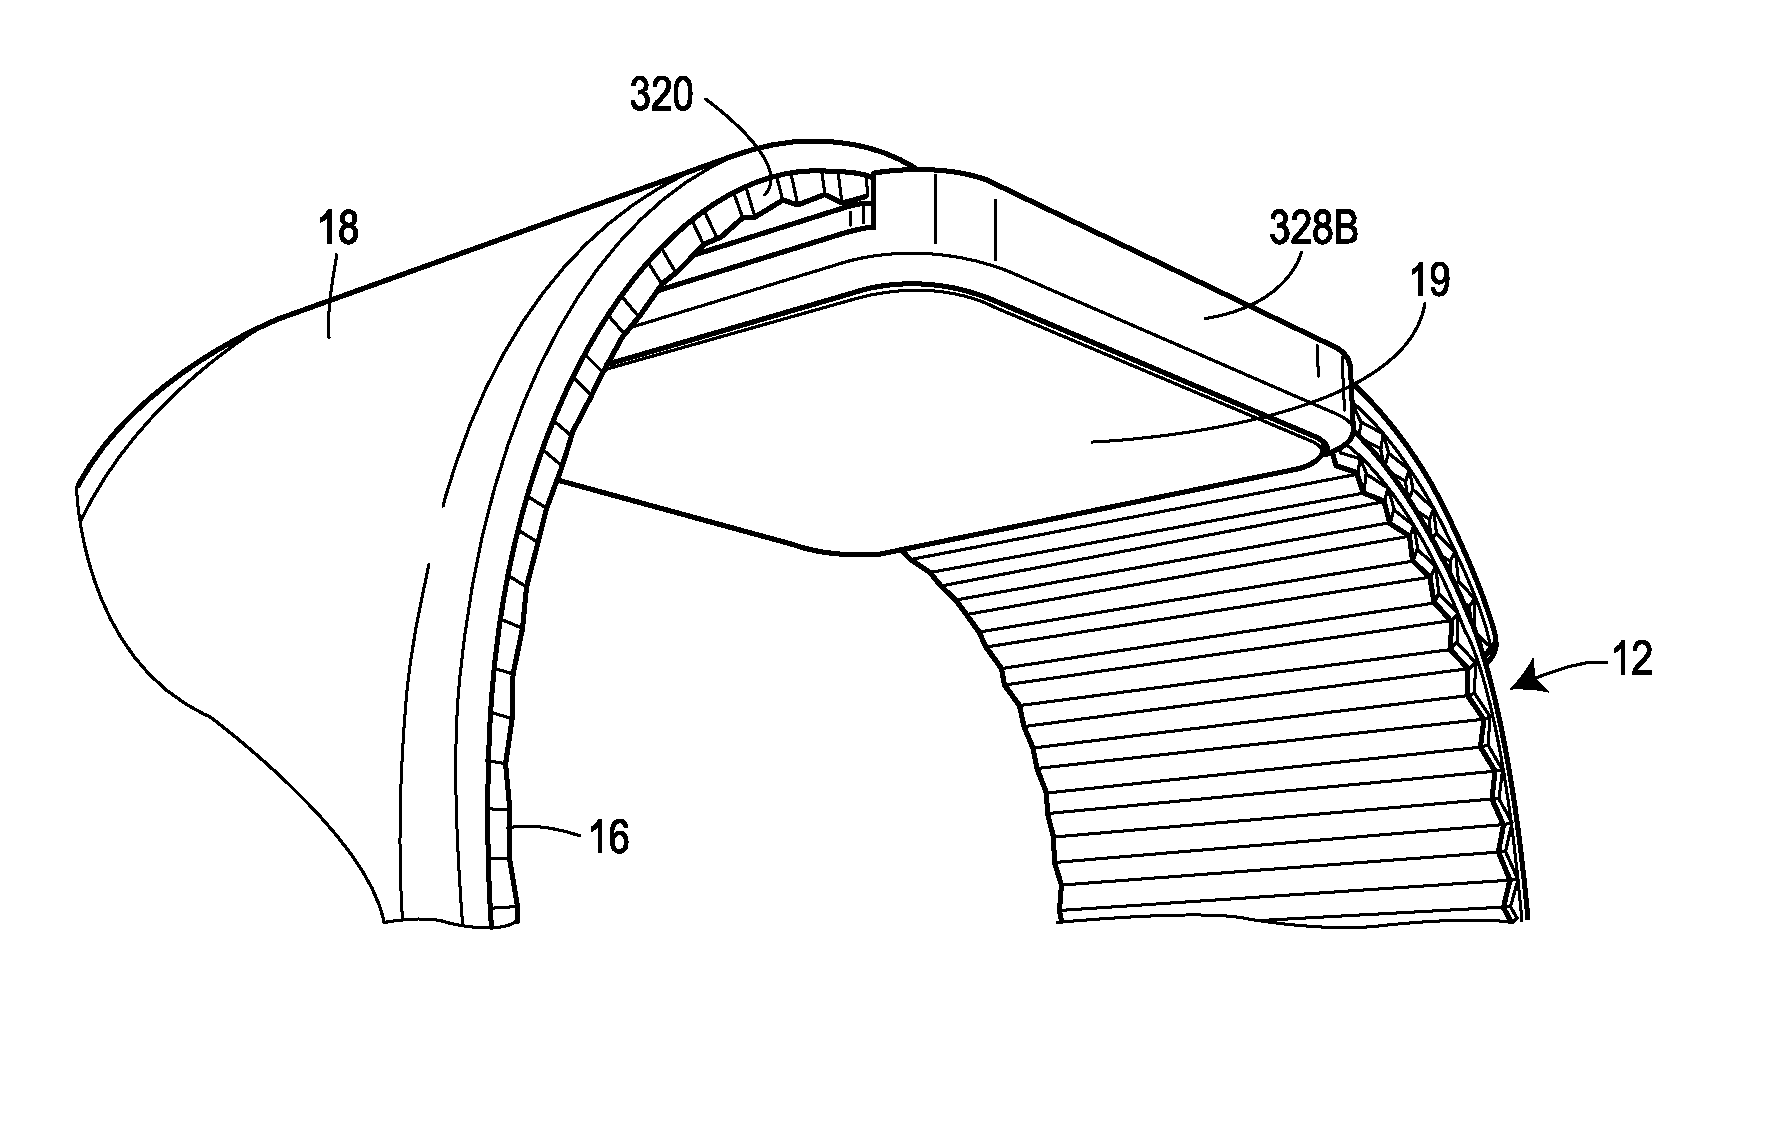 Support structures for a flexible electronic component